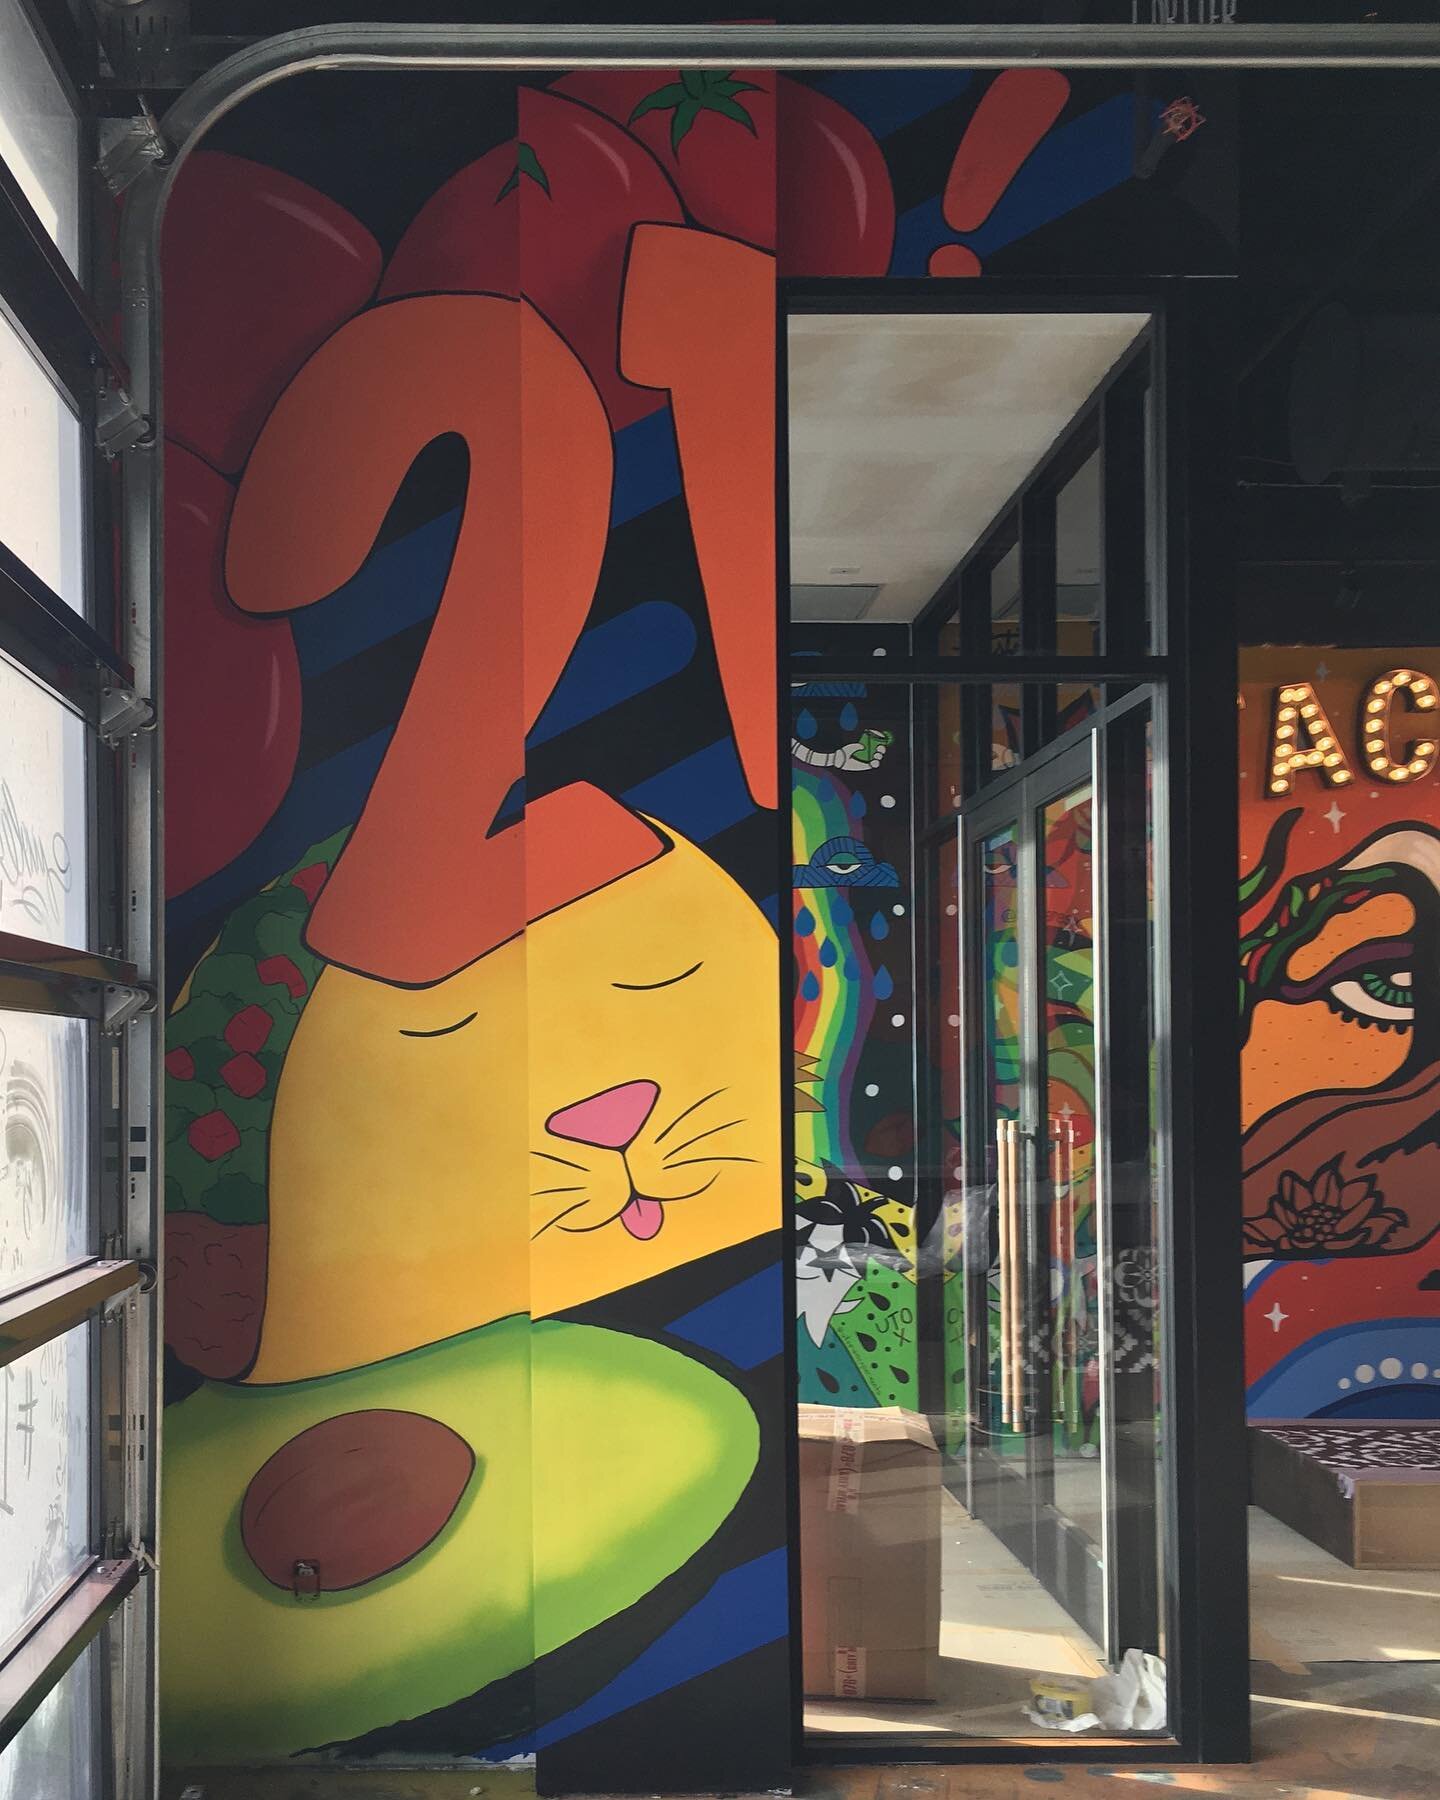 Here&rsquo;s some photos of the second finished section at Condado Tacos. I still have to post the finished first section but I need to get some better photos. The number 21 appears in many of the murals here as this is the 21st location. Huge thank 